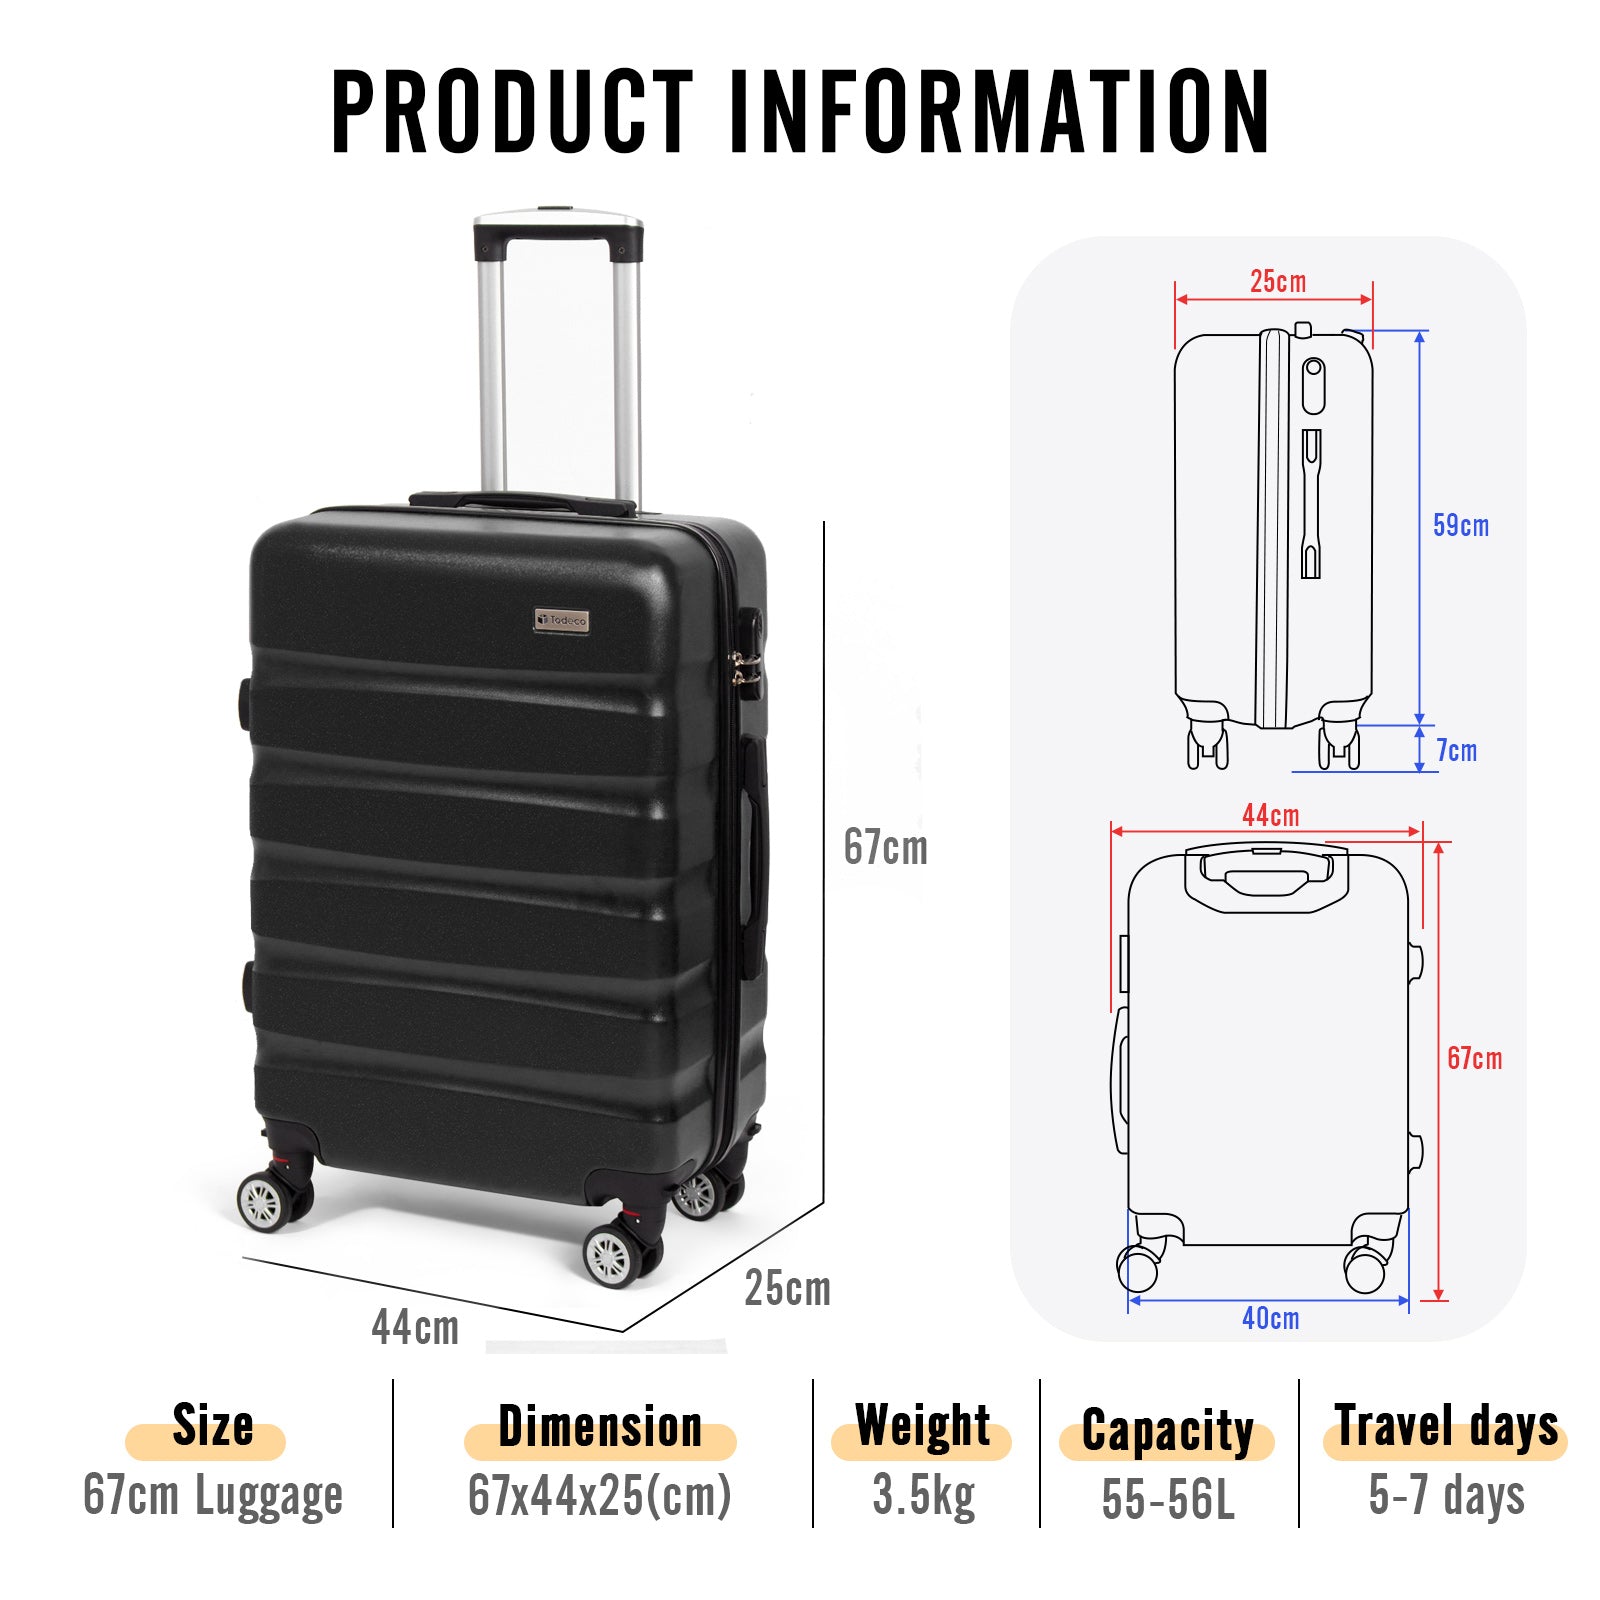 Todeco-Medium-Suitcase-67cm-Rigid-and-Lightweight-ABS-PC-Lightweight-Carry-on-Suitcase-with-Hard-Shell-Travel-Suitcase-with-4-Double-Wheels-67-44-25cm-Black